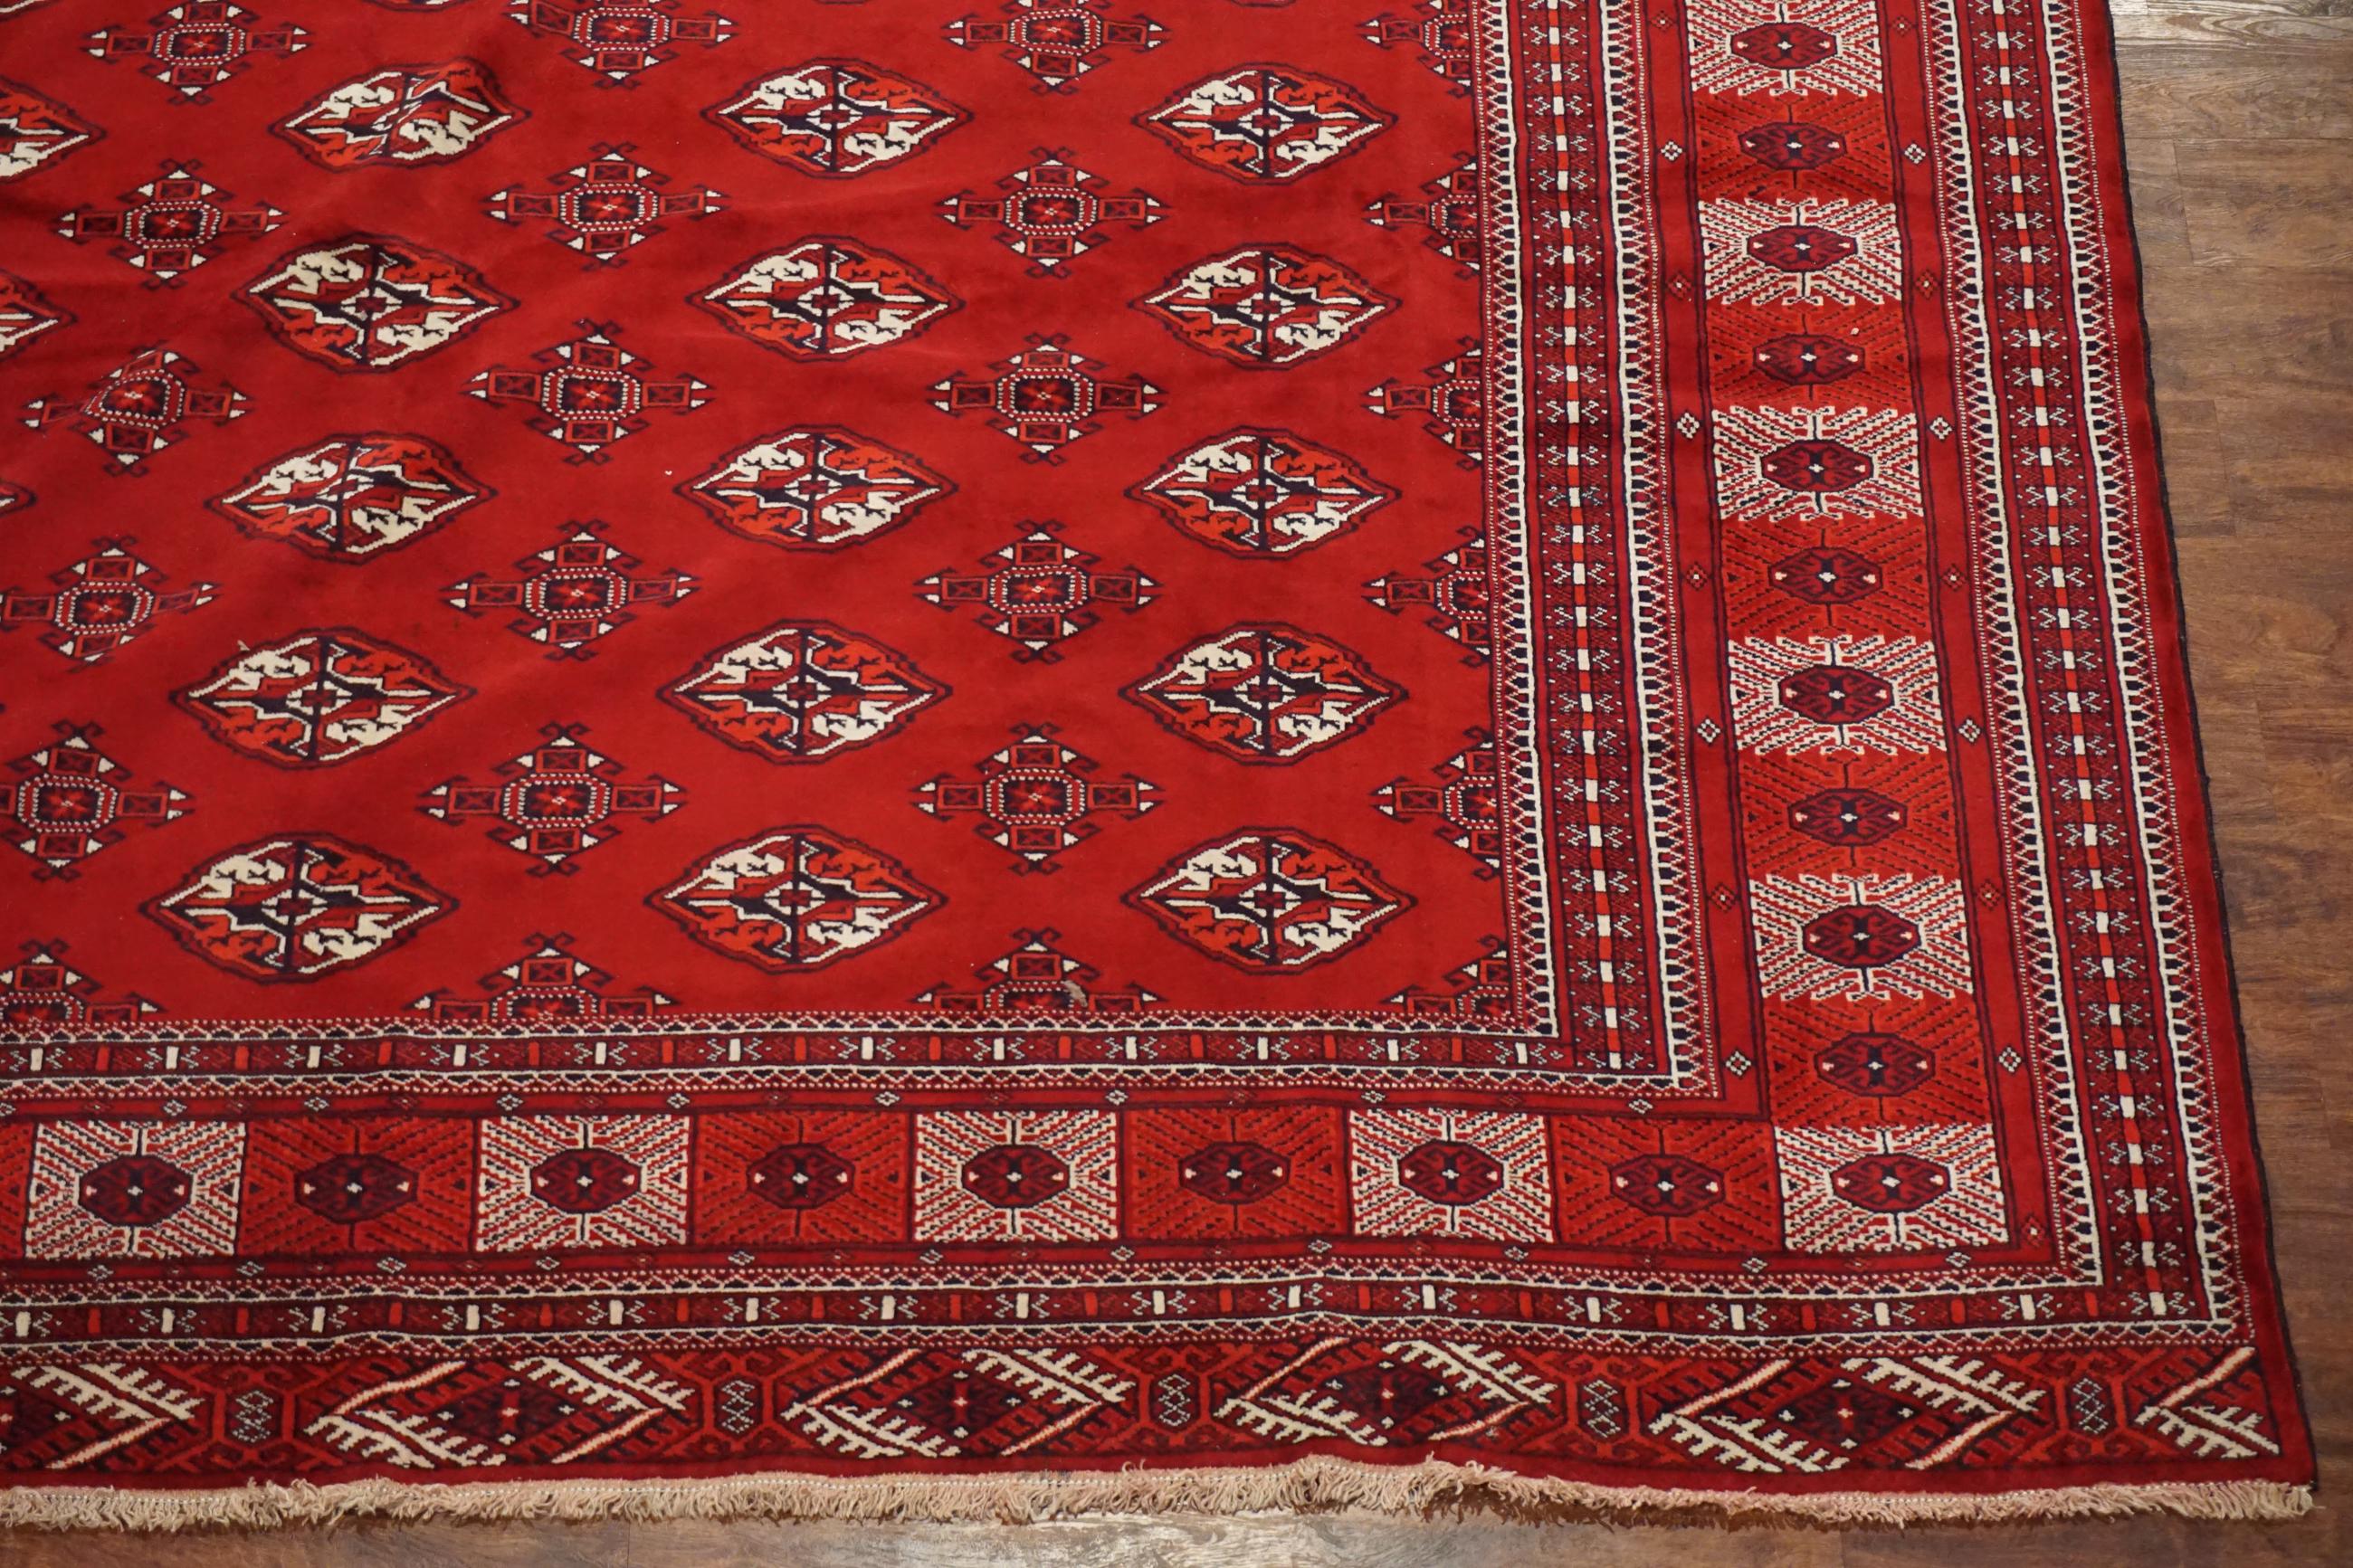 Vintage Turkoman Bukhara Rug, circa 1970 In Excellent Condition For Sale In Laguna Hills, CA